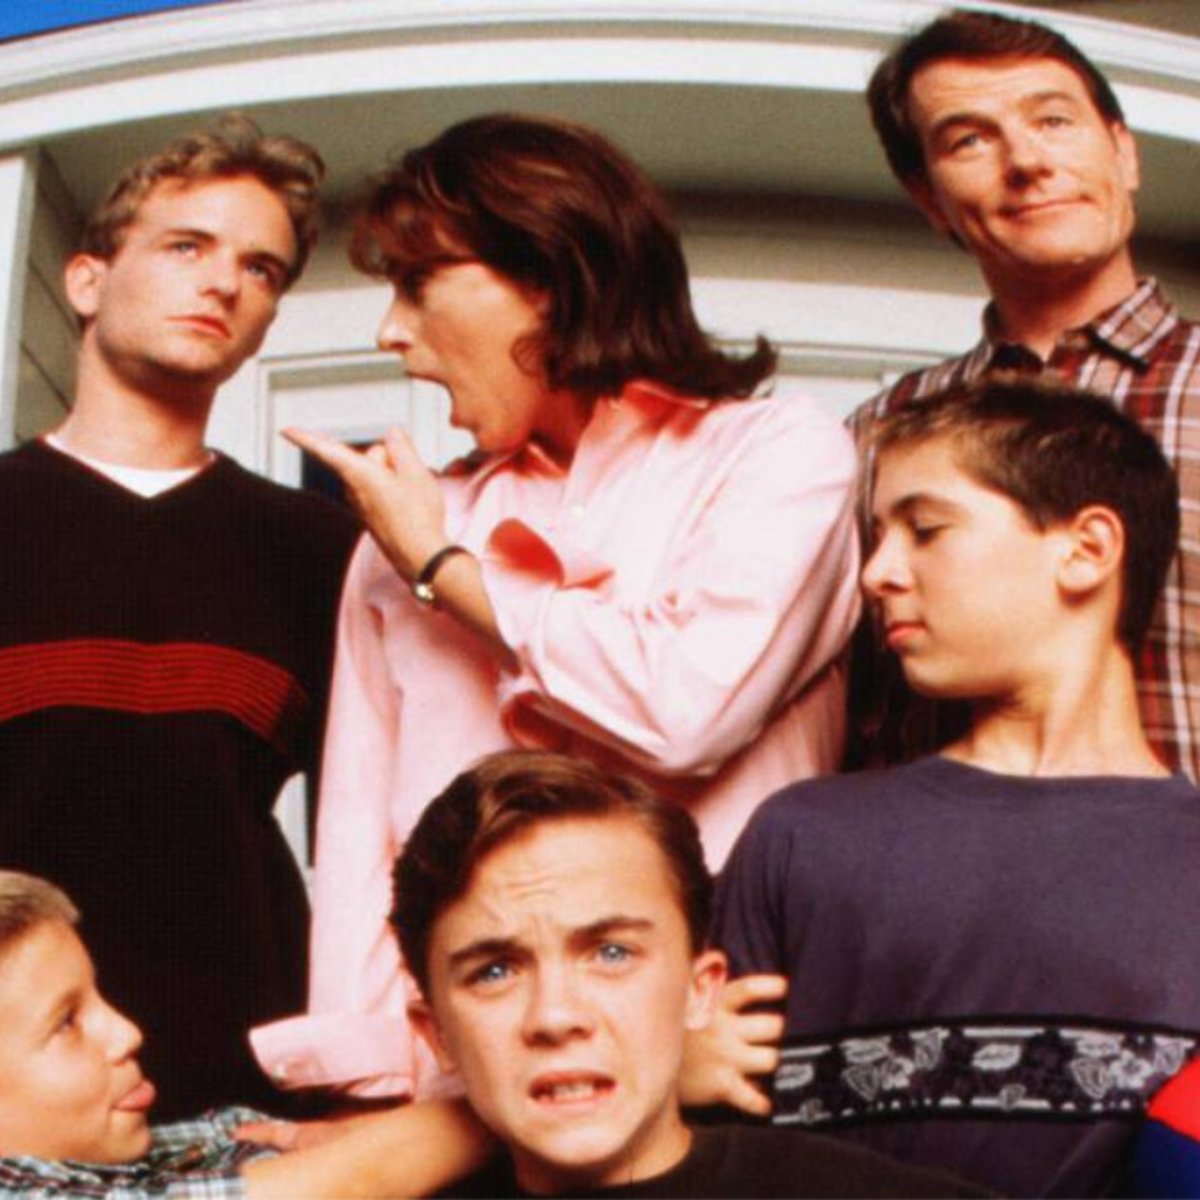 What The Malcolm In The Middle Cast Are Up To Years Later